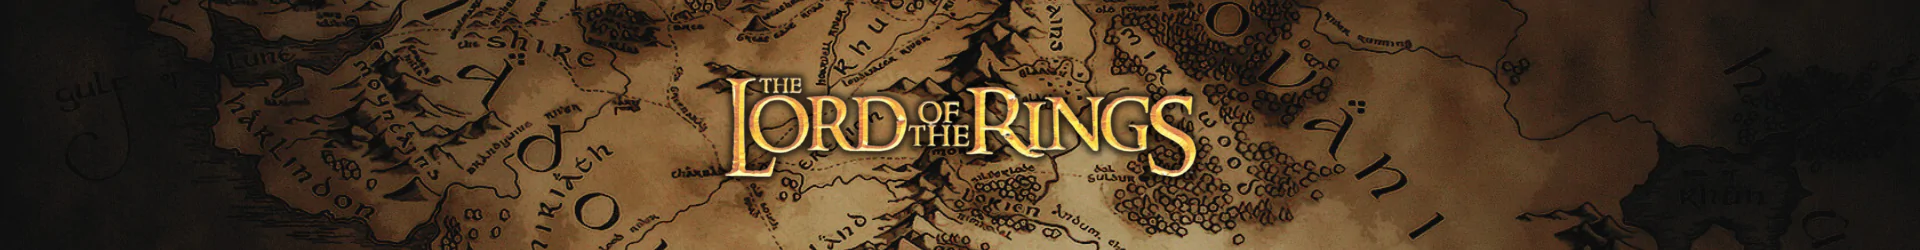 Lord of the Rings notizbücher banner